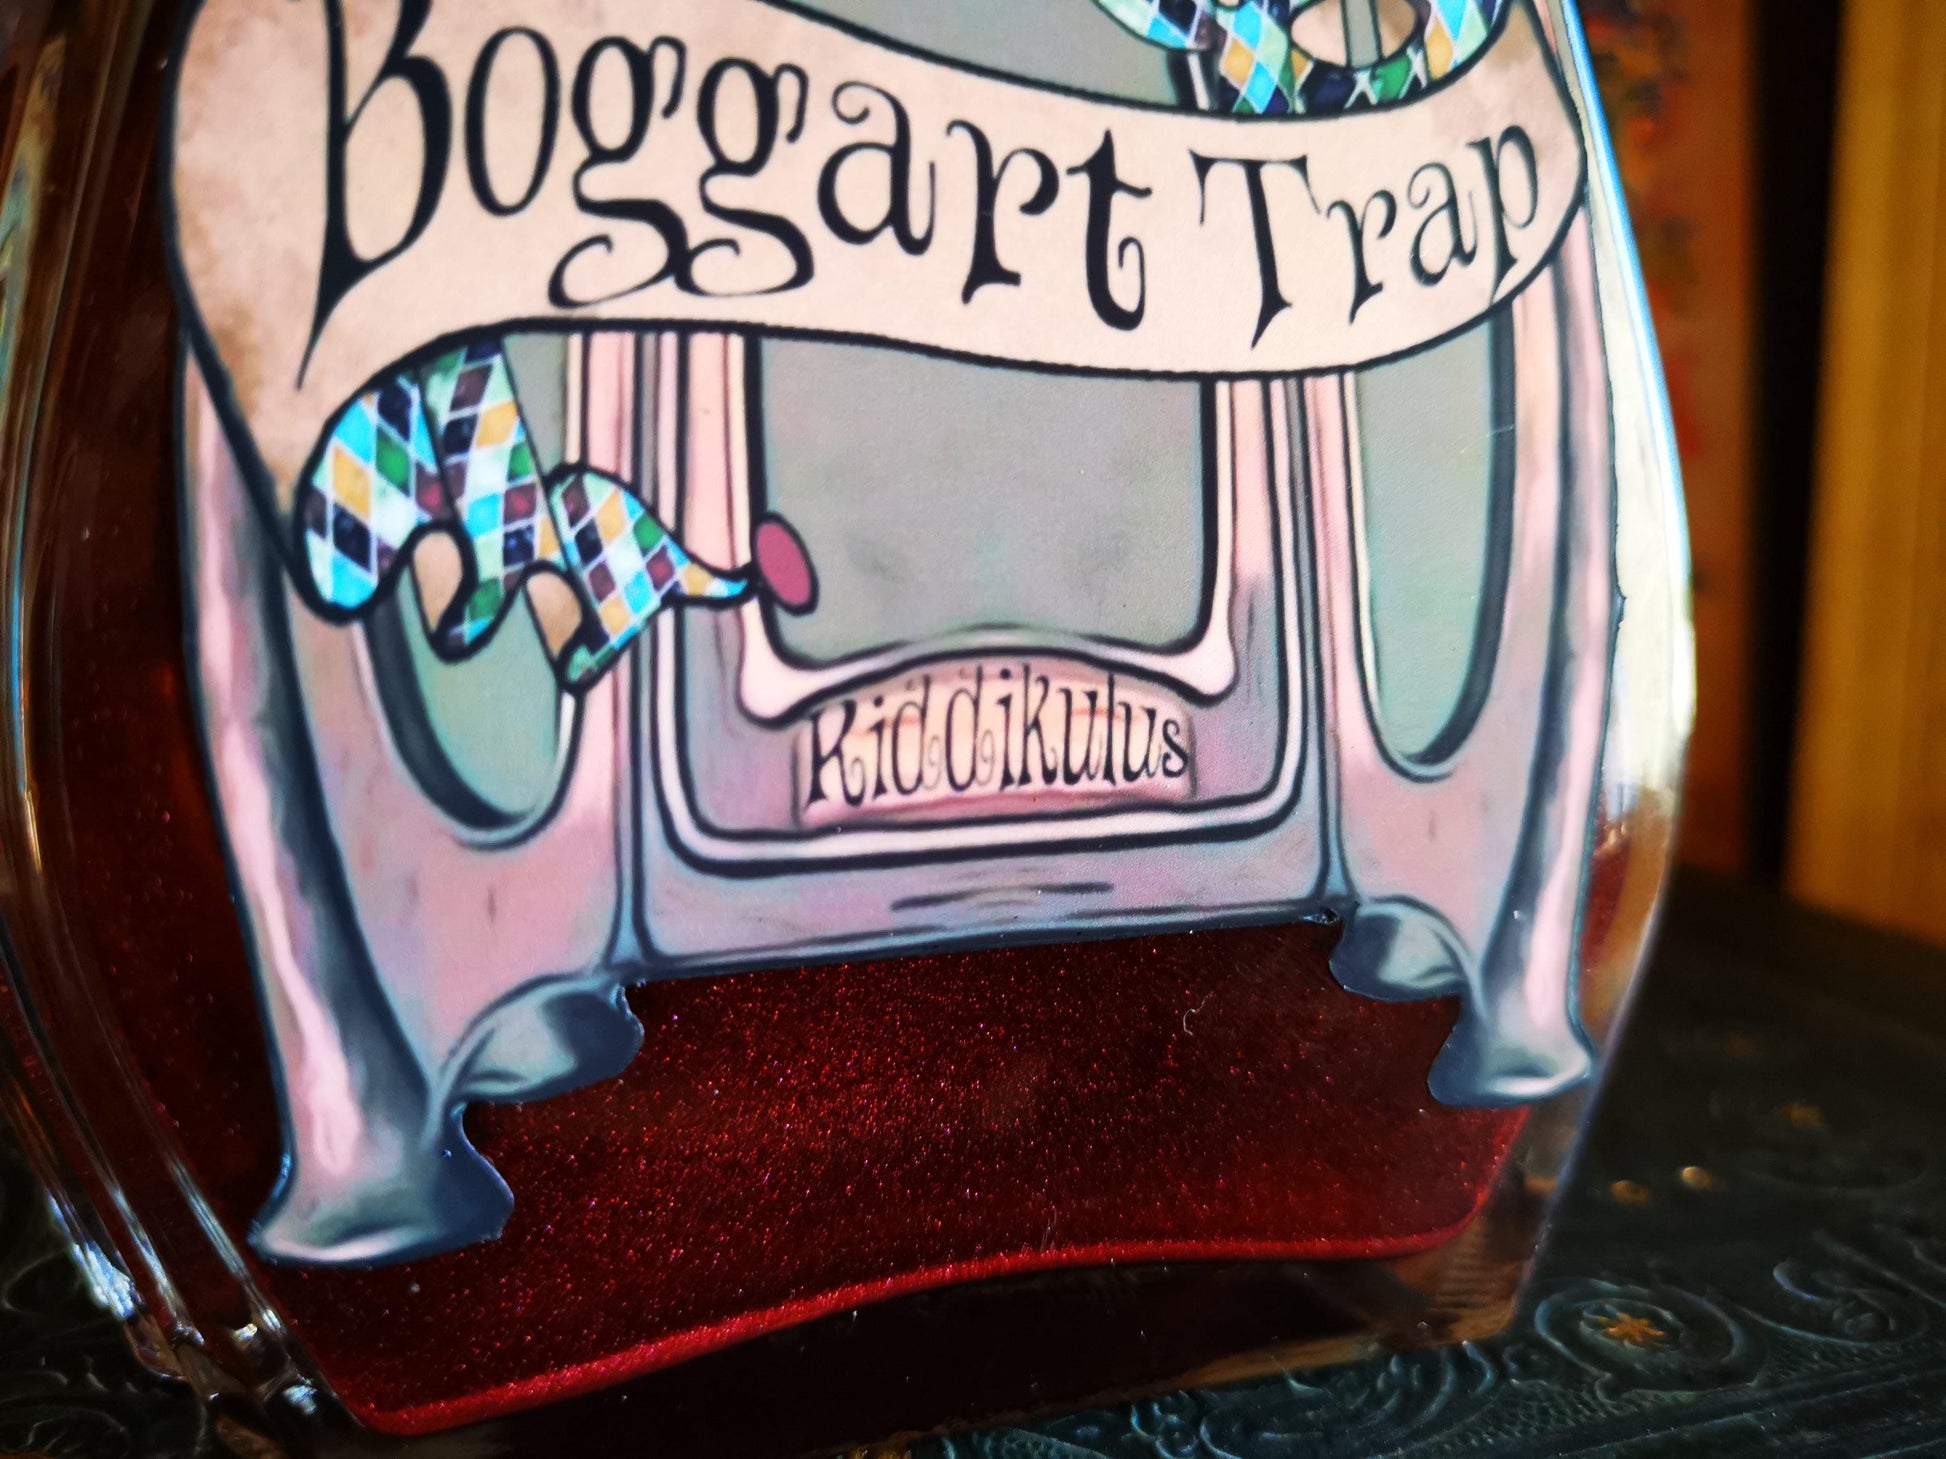 Boggart Trap Aravis Potions Apothecary Harry Potter